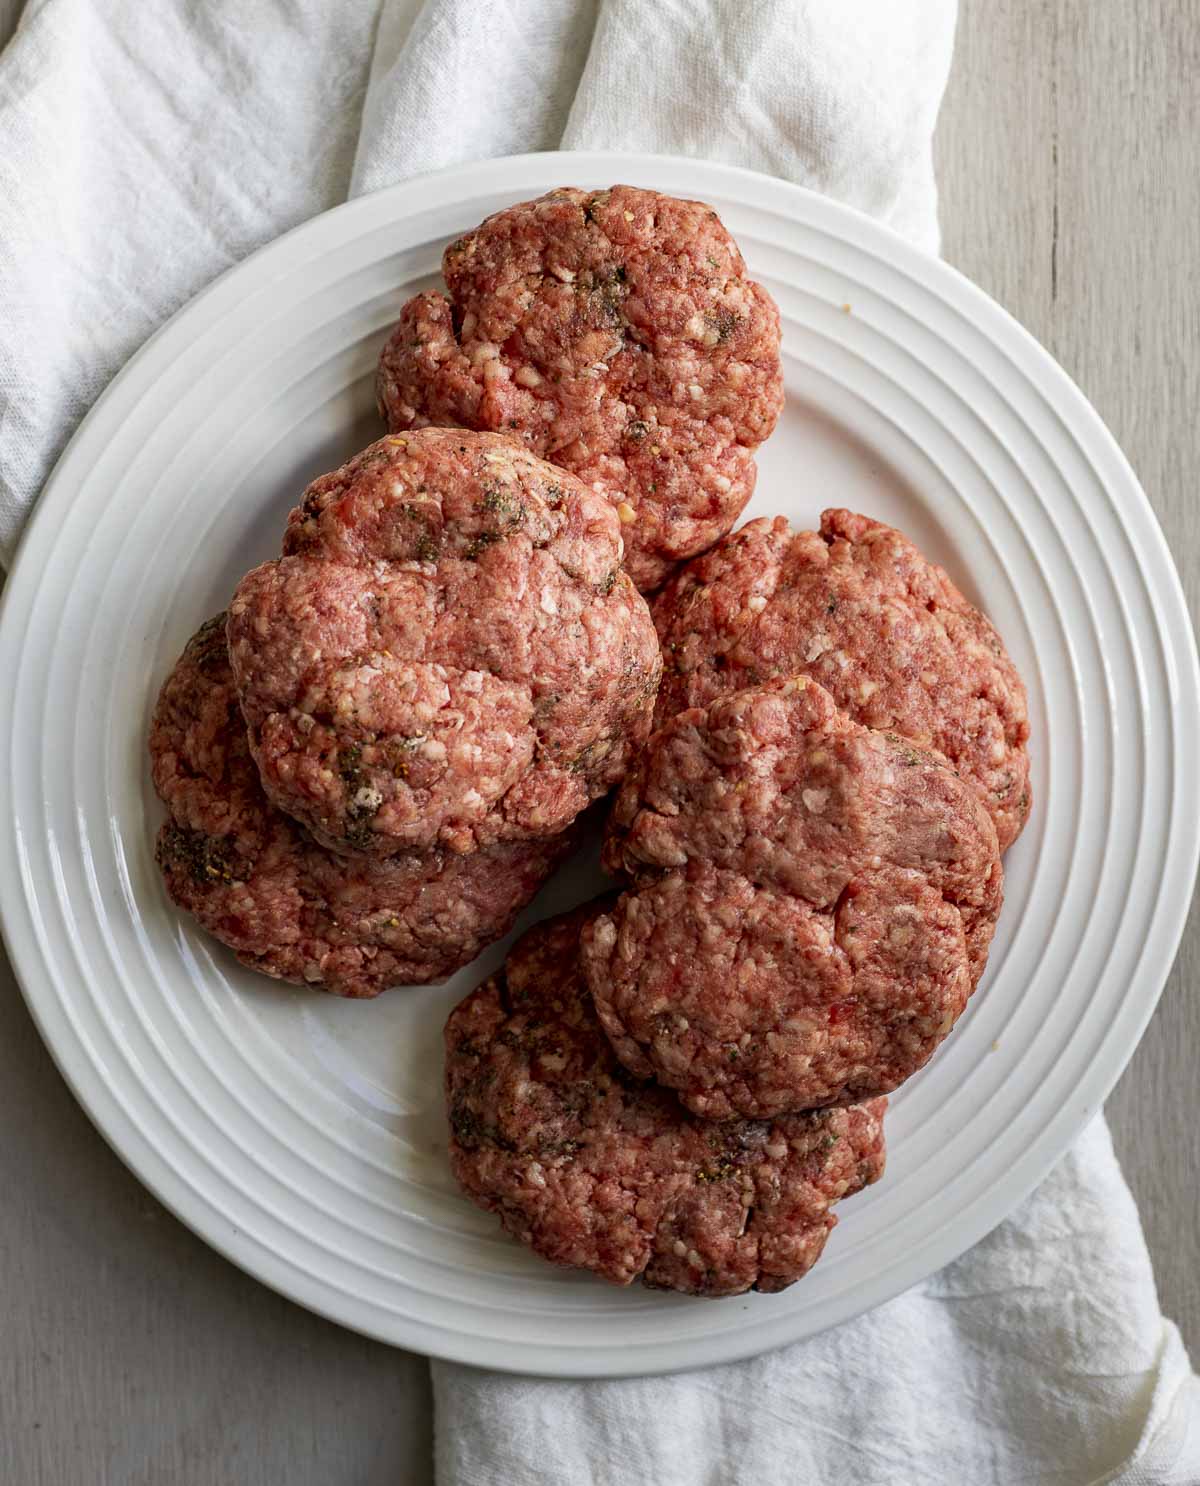 Raw ground beef burger patties on a white plate.